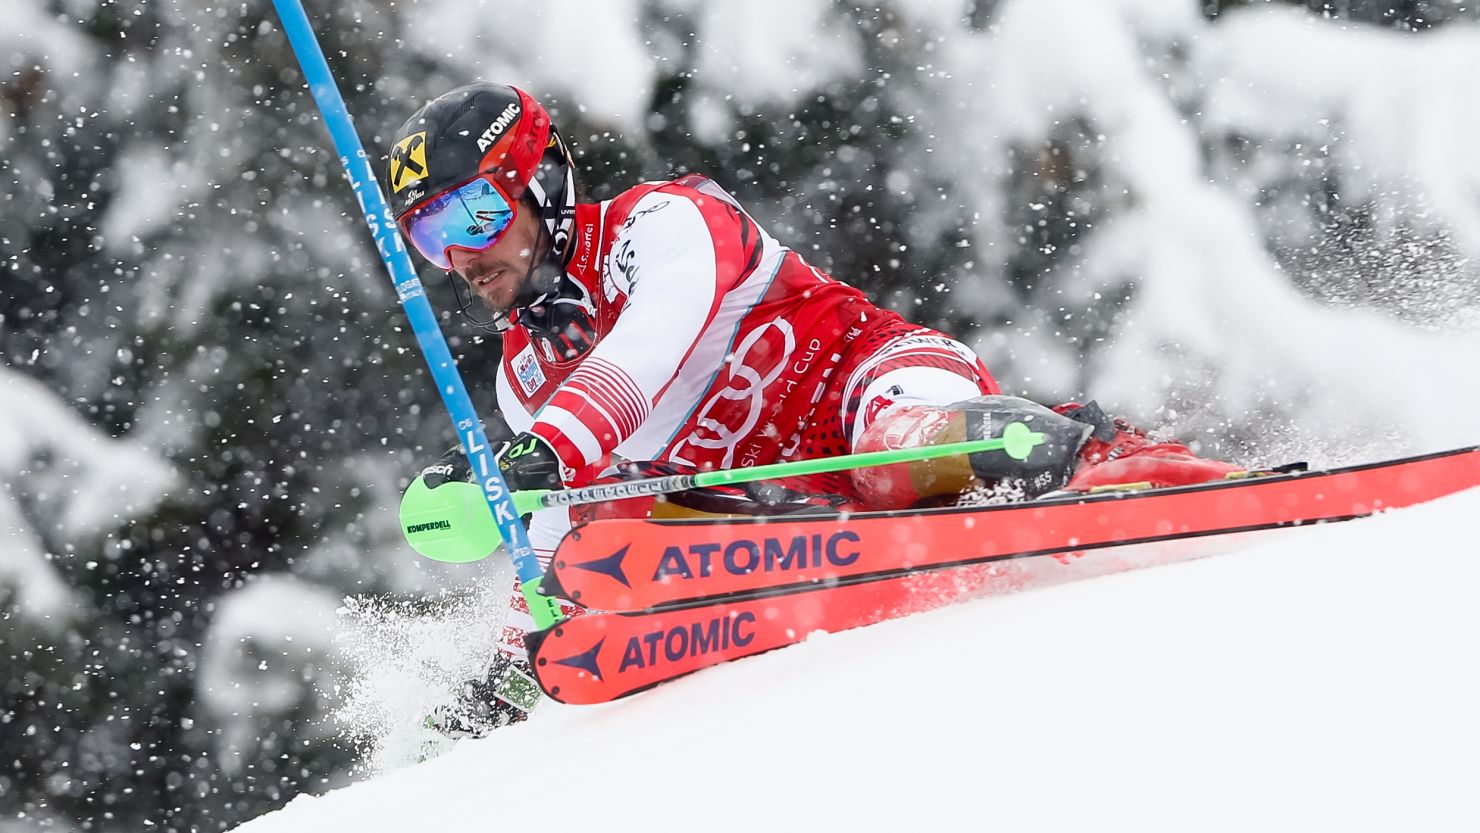 Hirscher was recently named "Champion of Champions" for 2018 by French newspaper L'Equipe.